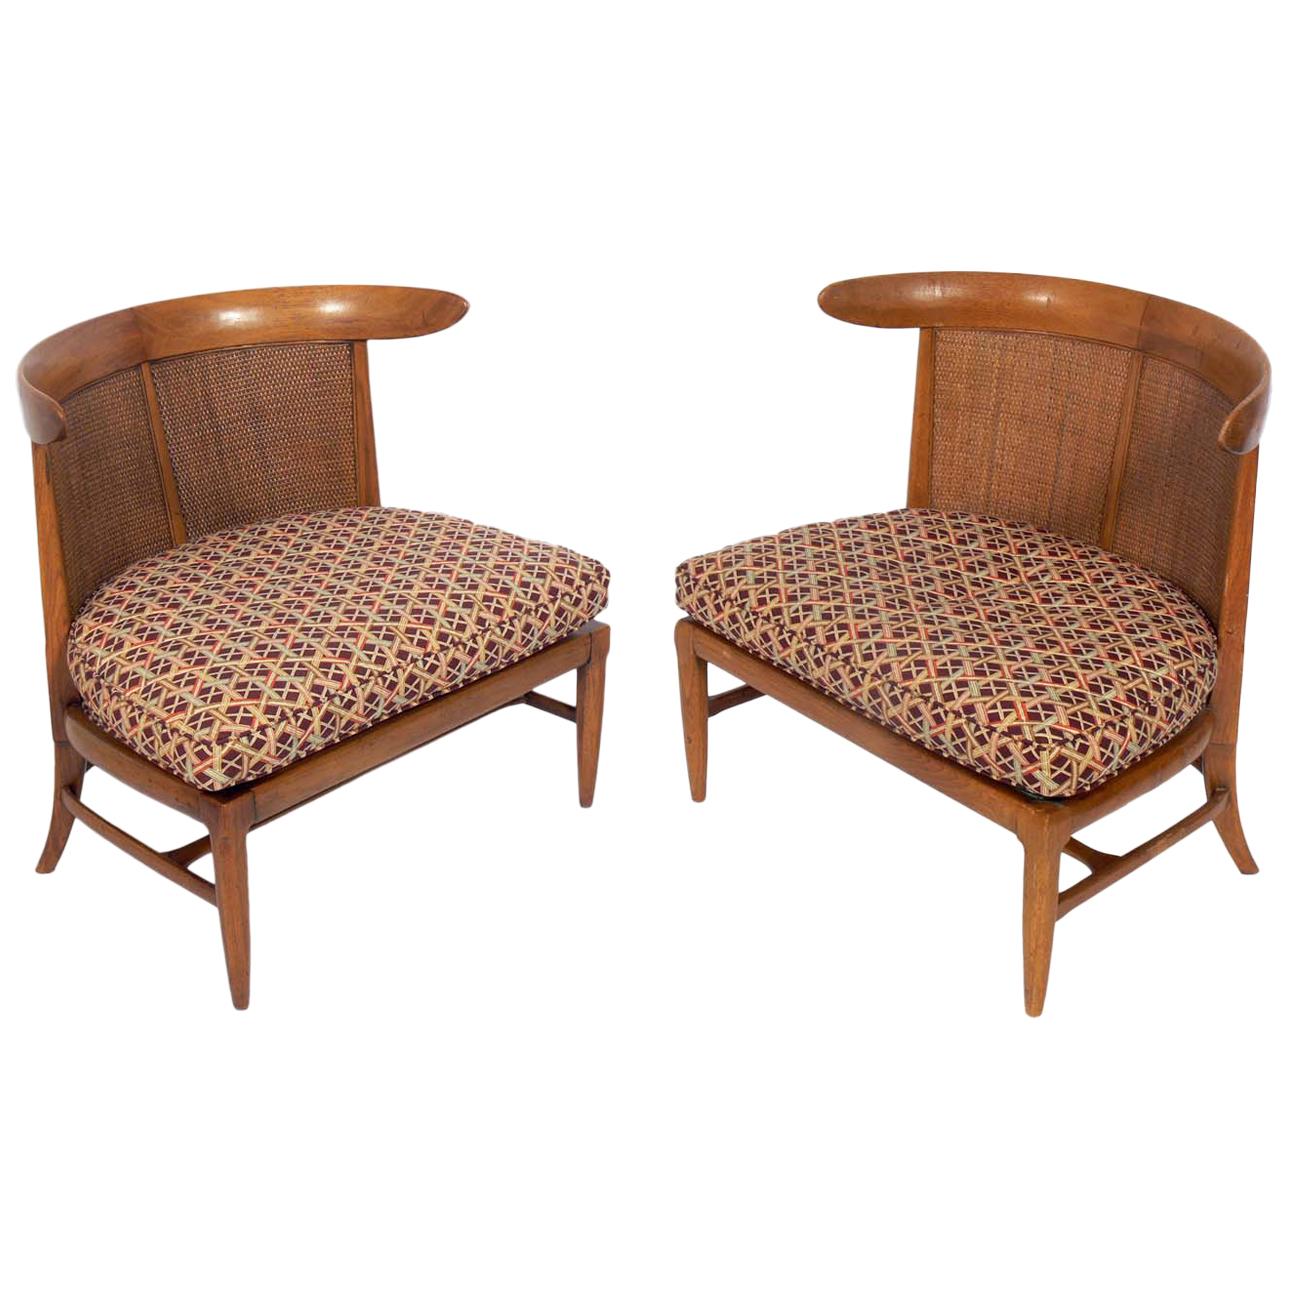 Pair of Curvaceous Caned Back Slipper Chairs by Lubberts & Mulder for Tomlinson